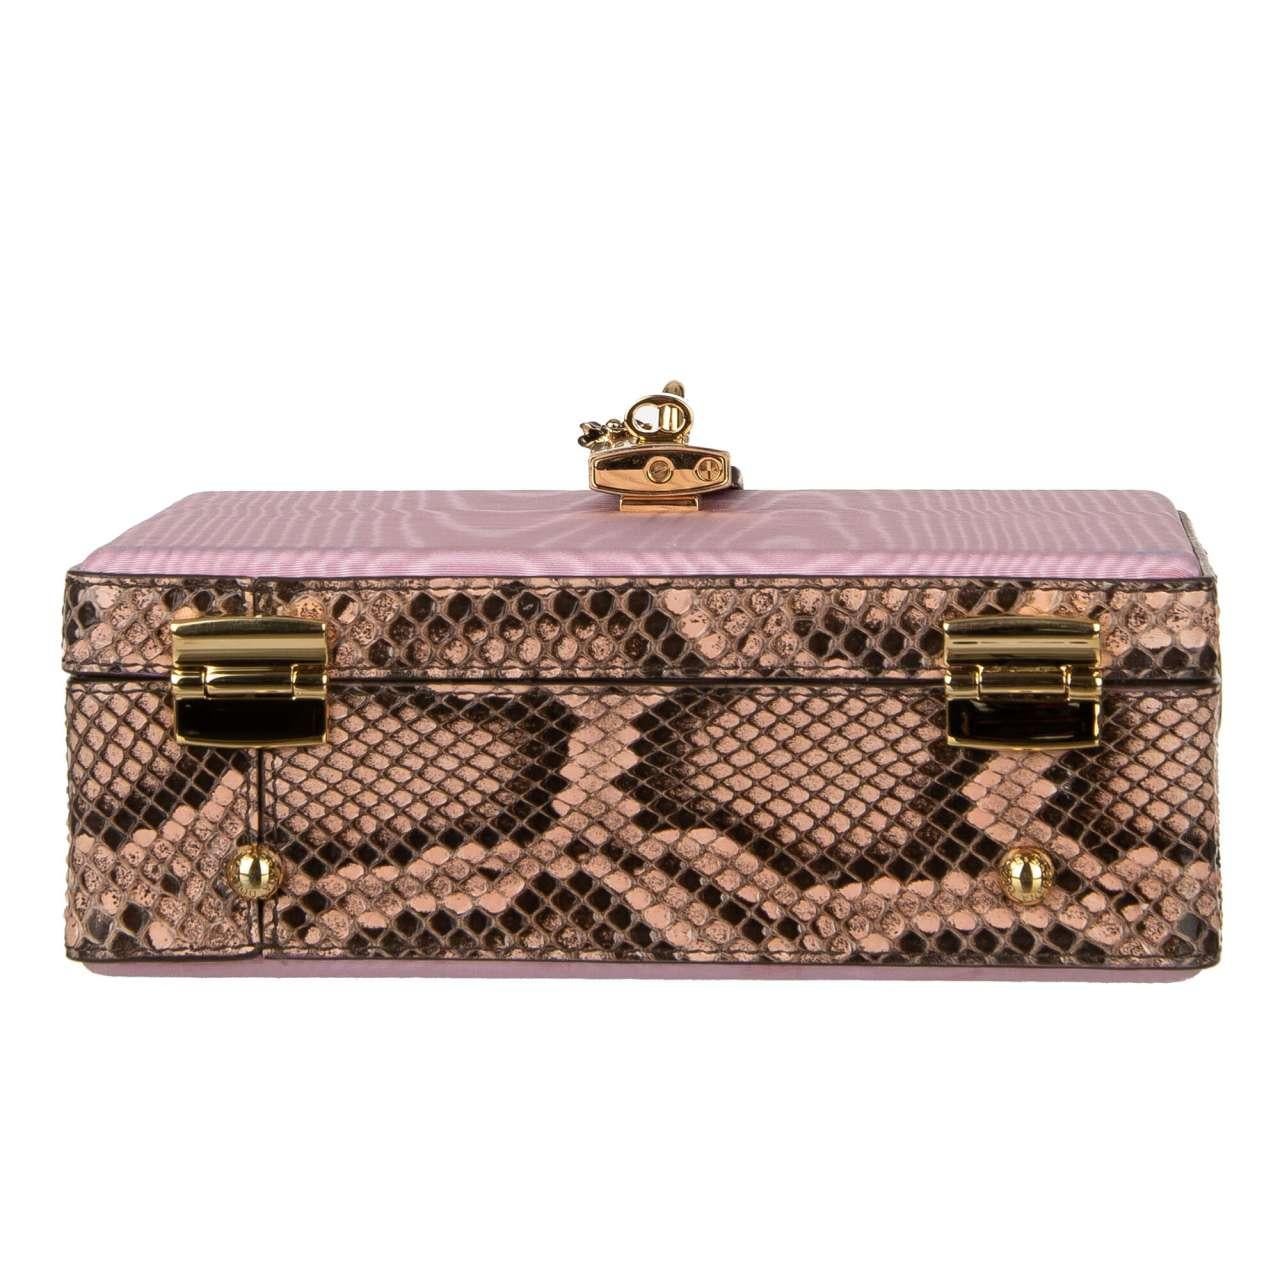 Dolce & Gabbana - Unique Snakeskin and Moire Clutch Bag DOLCE BOX Pink For Sale 1